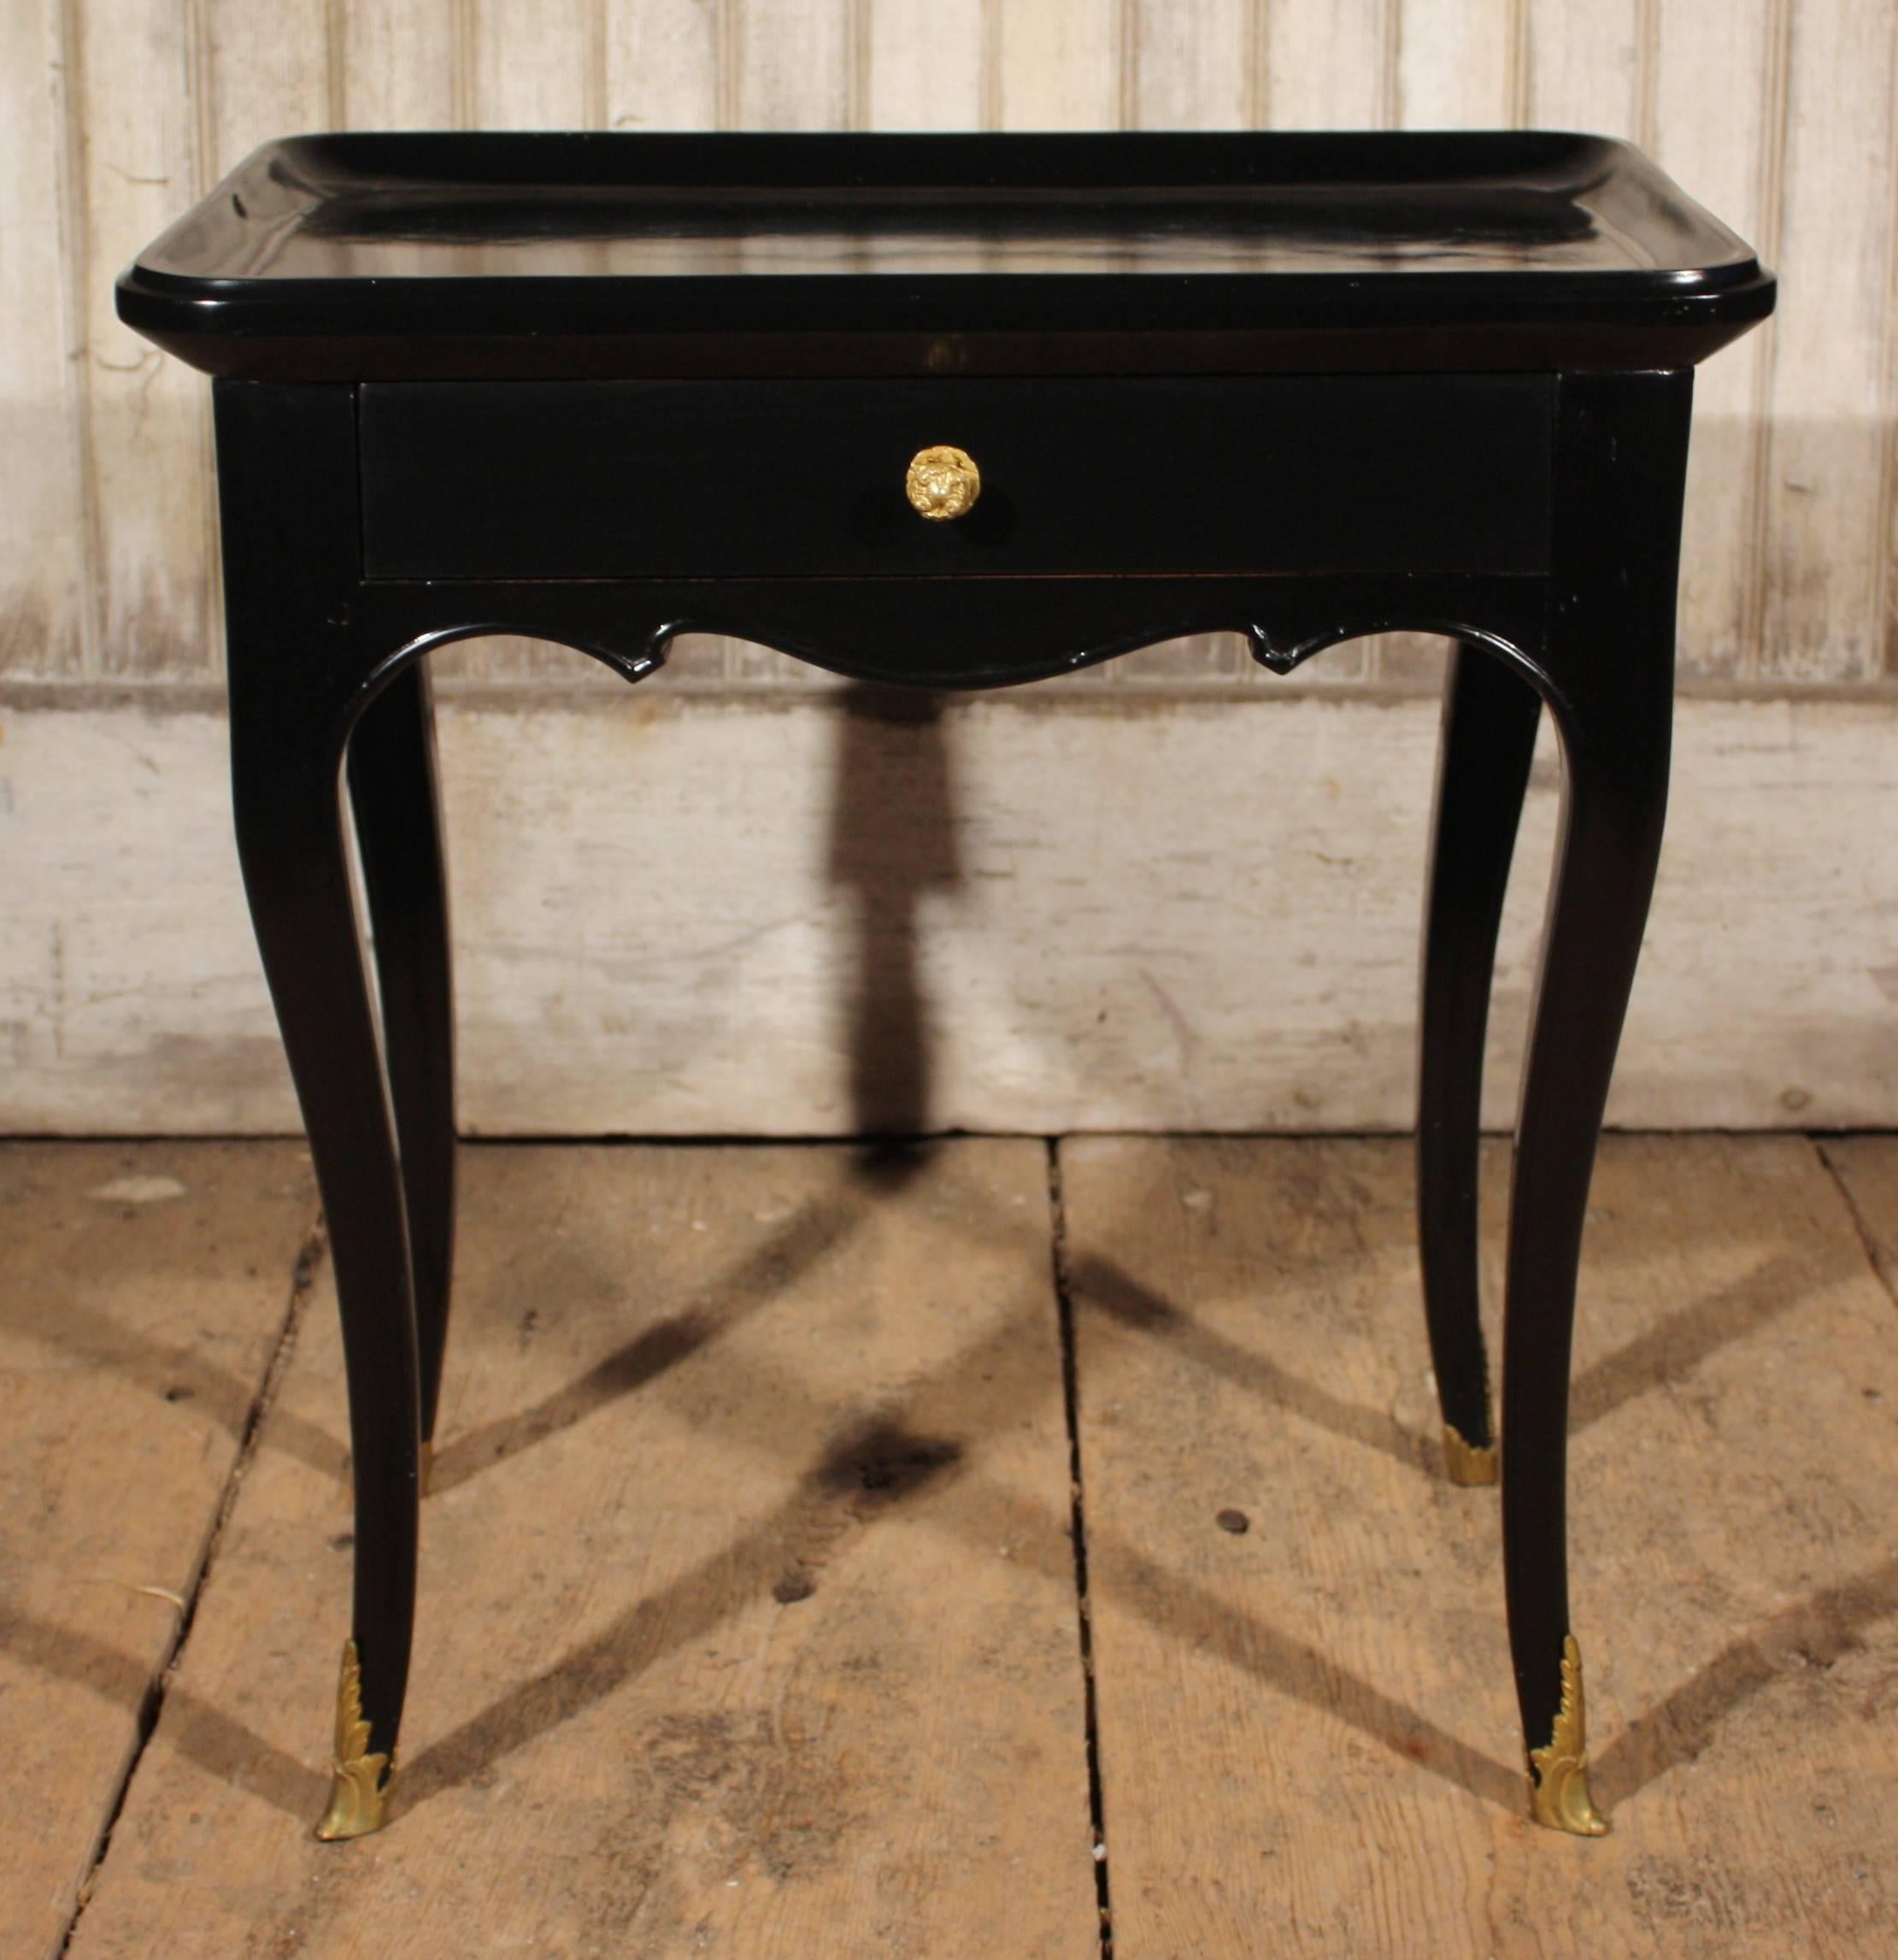 A late 18th century Louis XV side table in black lacquer with a single drawer, cabriole legs and a scalloped apron. The top is dished out to serve as a "vide poche" (empty your pockets).  The piece has fine gilt bronze sabots and drawer